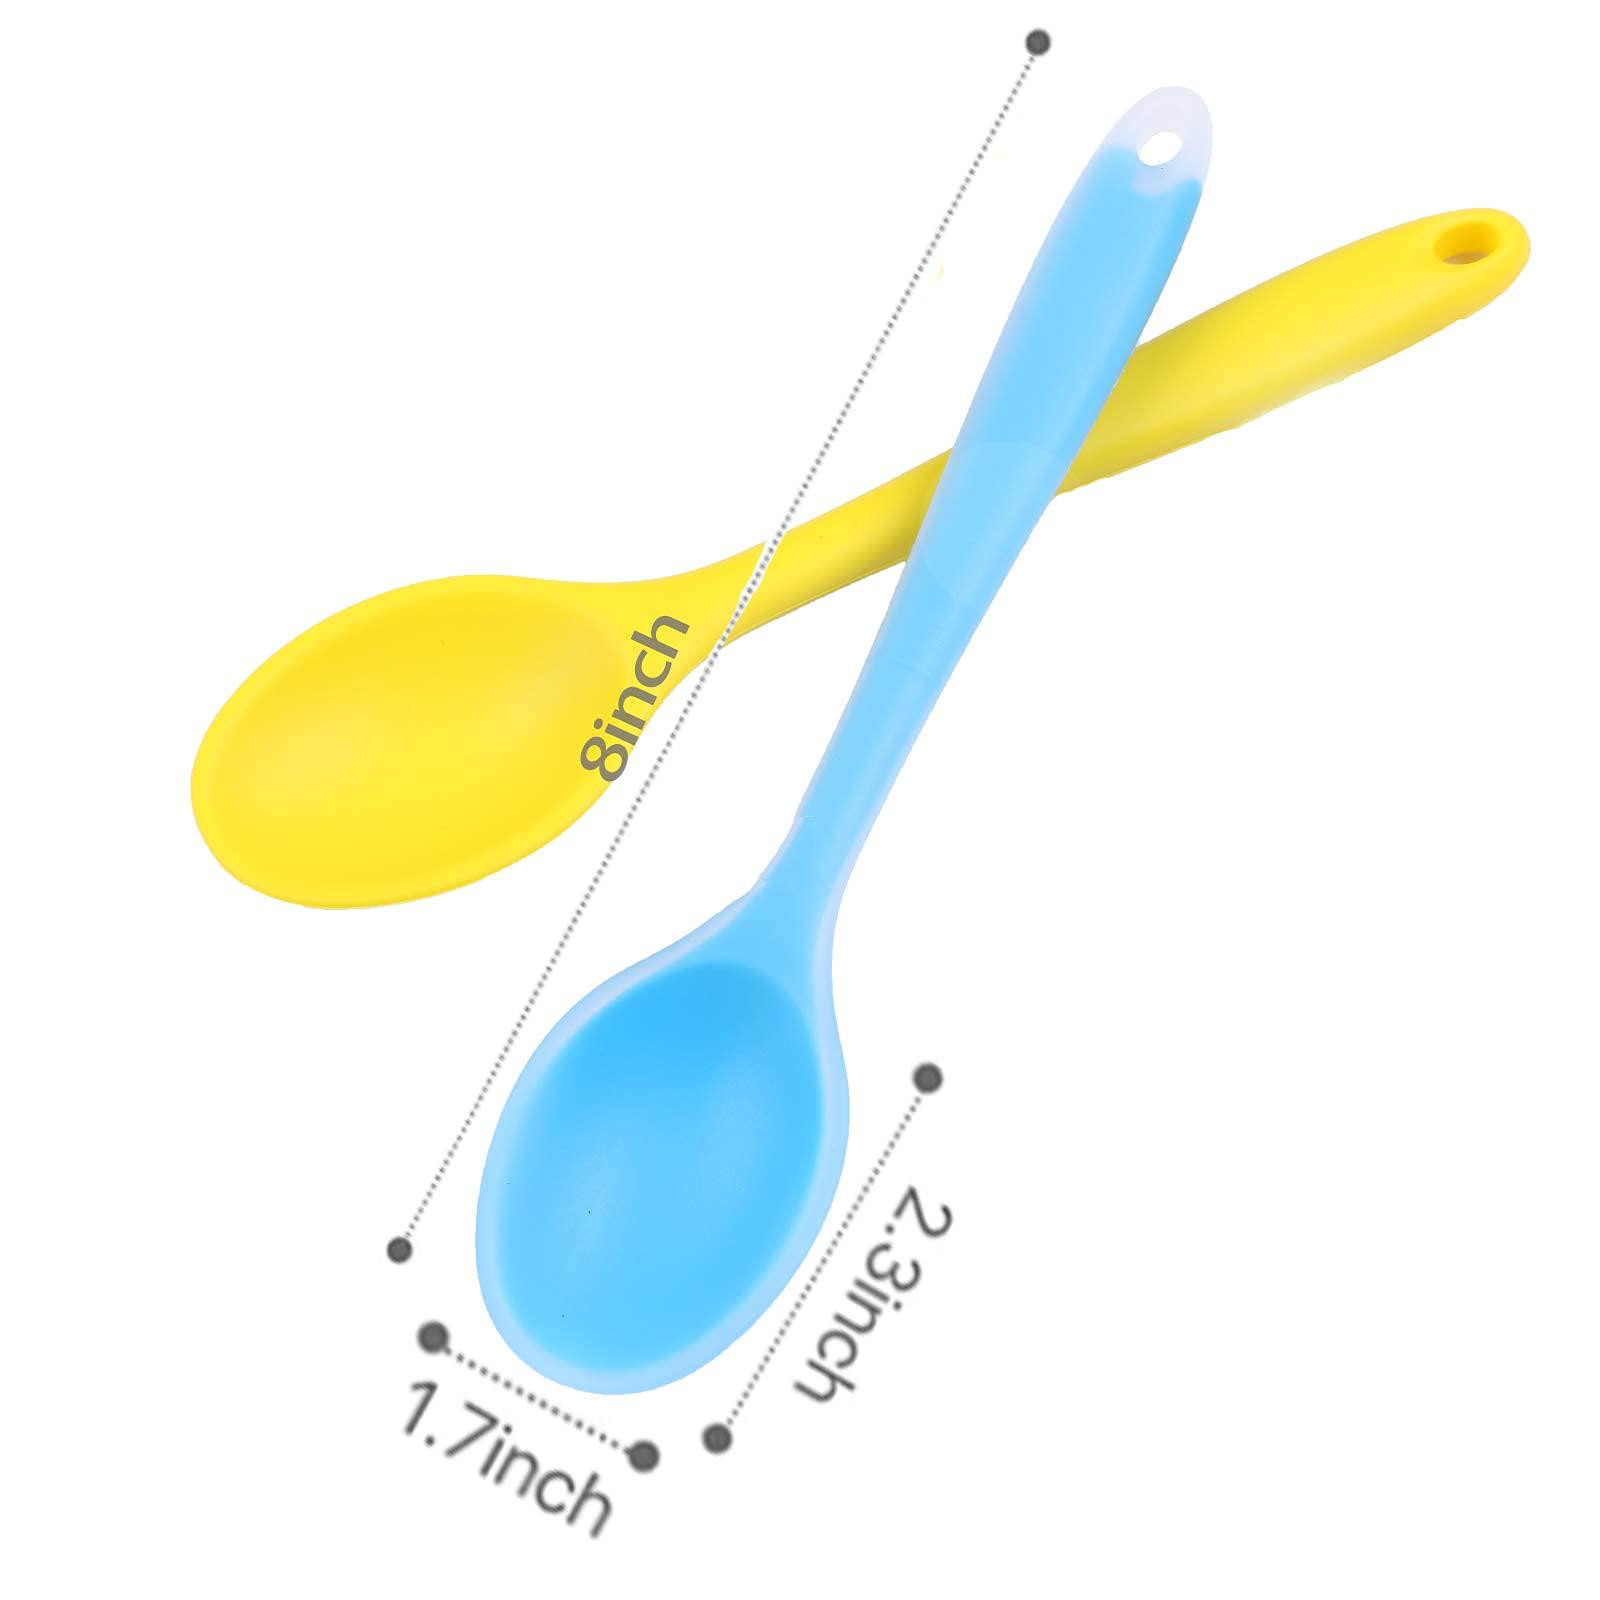 unp a kuscor 6 pieces silicone mixing spoons, 8 inch heat